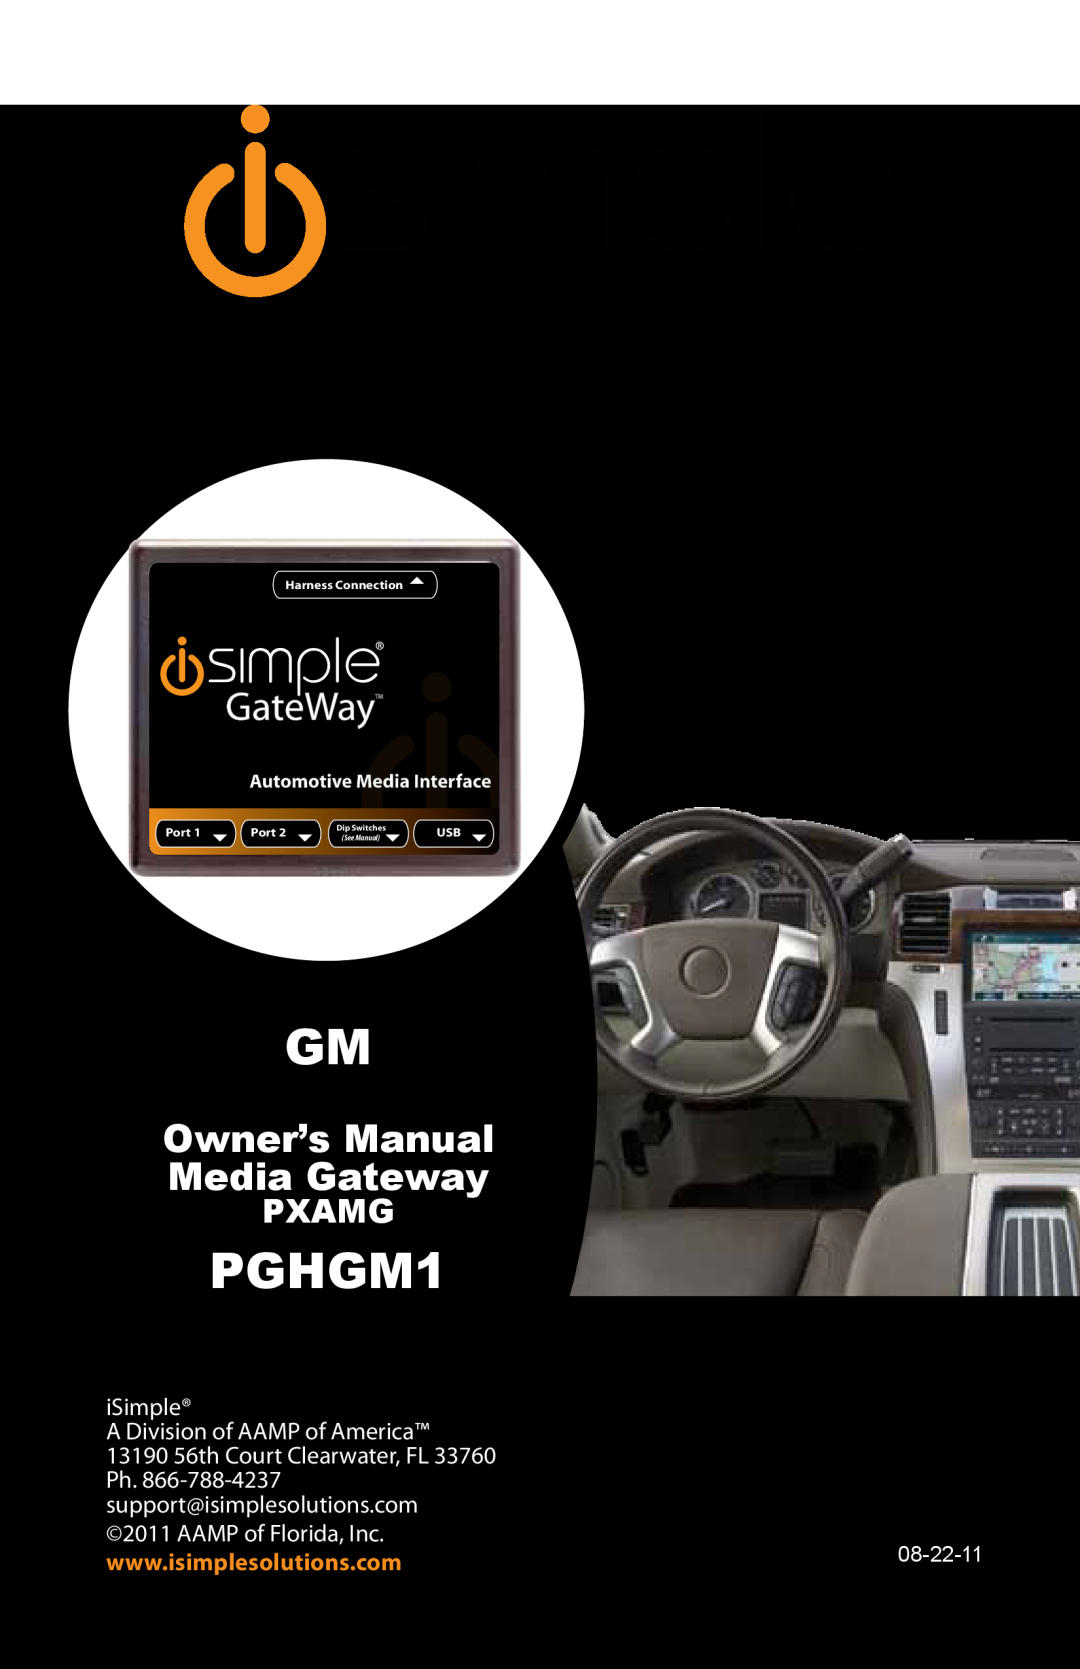 iSimple PGHGM1 owner manual Satellite Radio, Expand Your Factory Radio, ISGM11, iSimple A Division of AAMP of America 